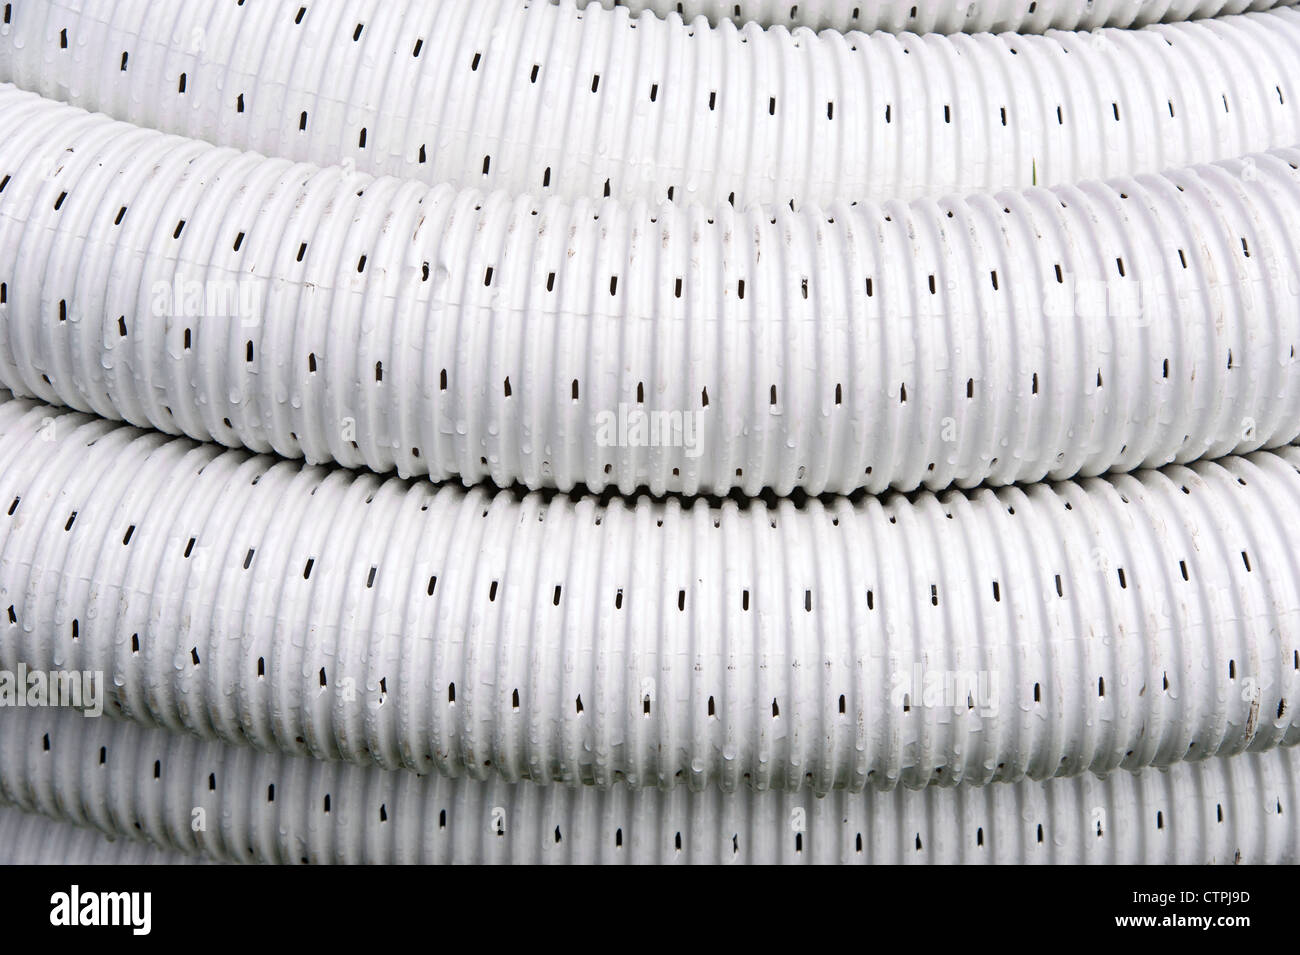 Perforated, flexible plastic piping used for land drainage Stock Photo